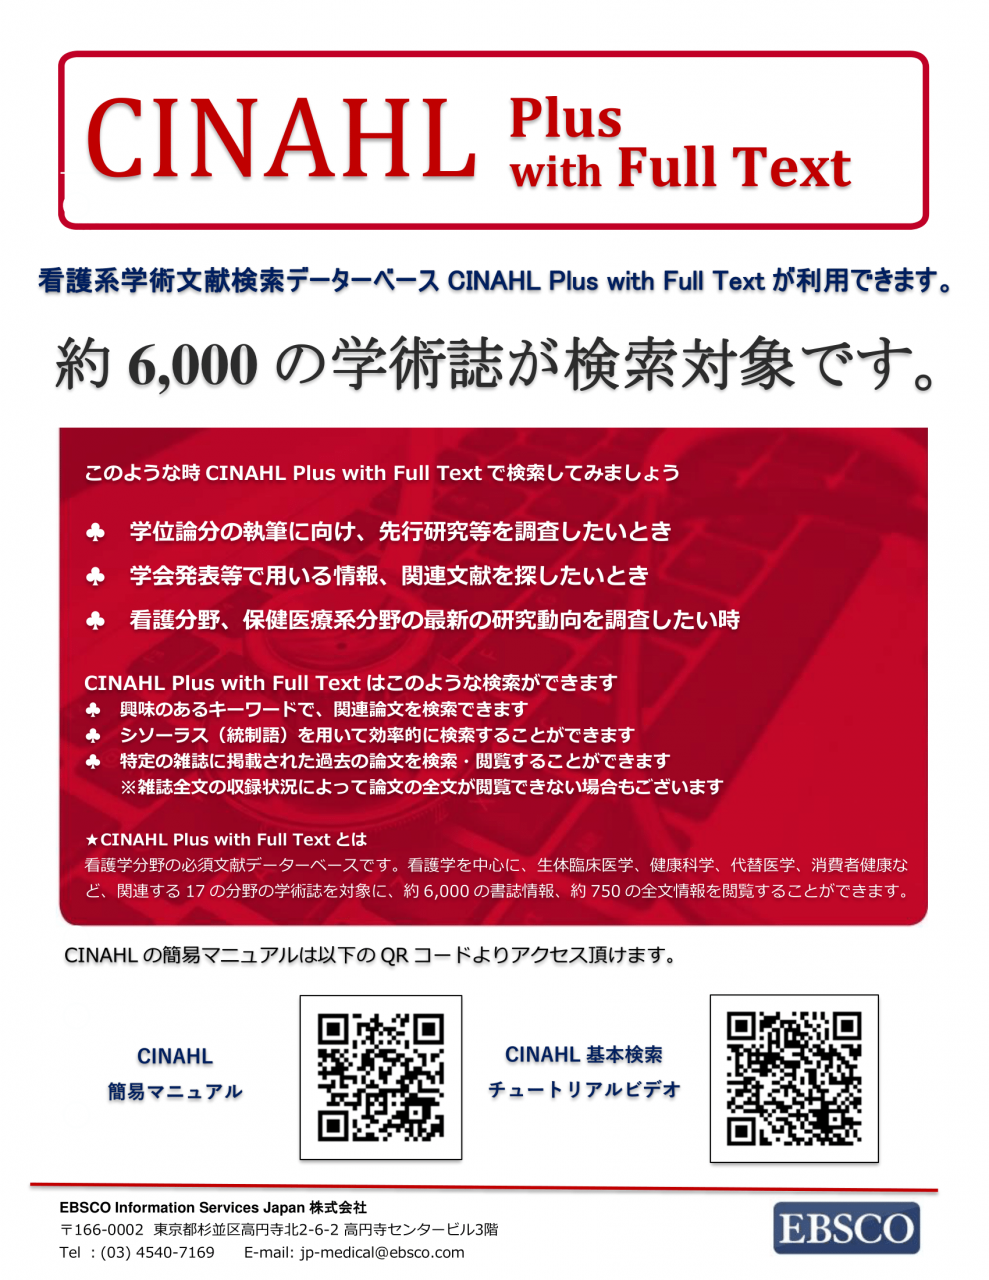 CINAHL Plus with Full Text